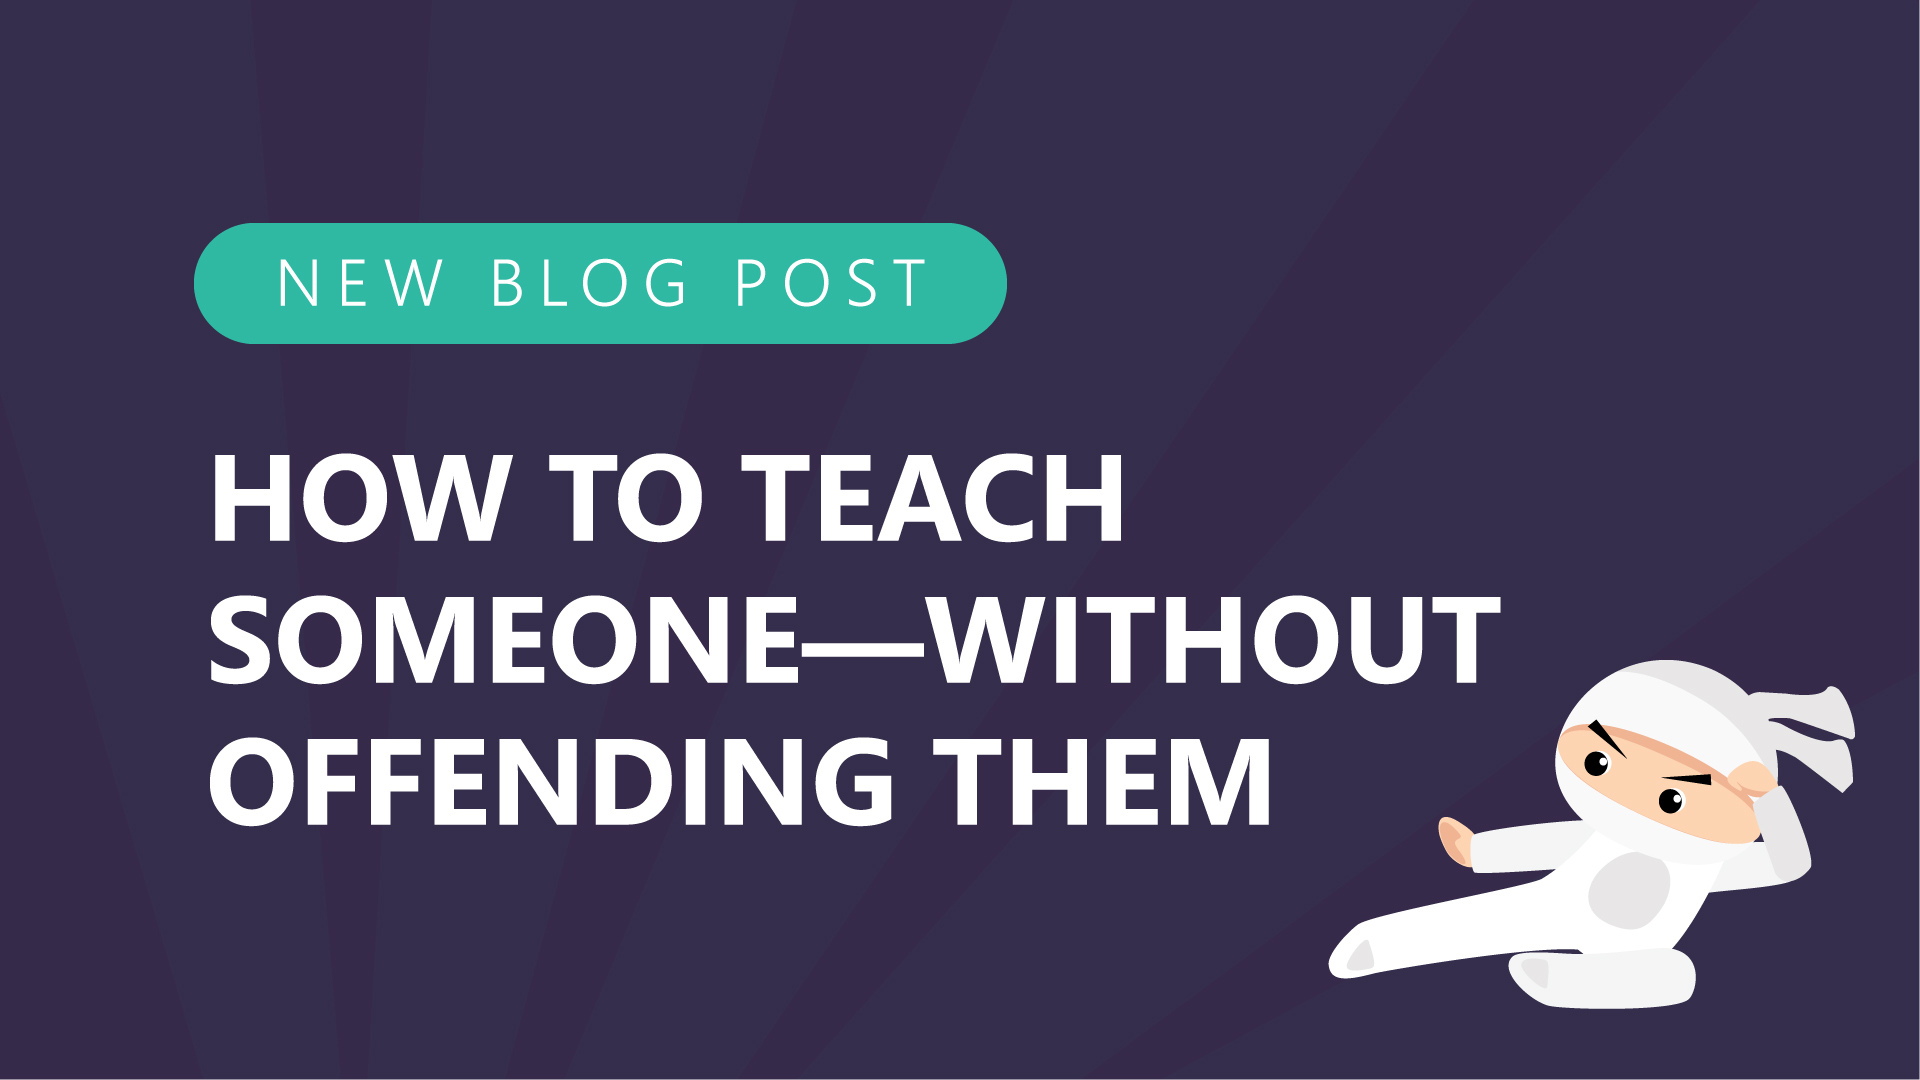 How-to-Teach-Someone—Without-Offending-Them.jpg